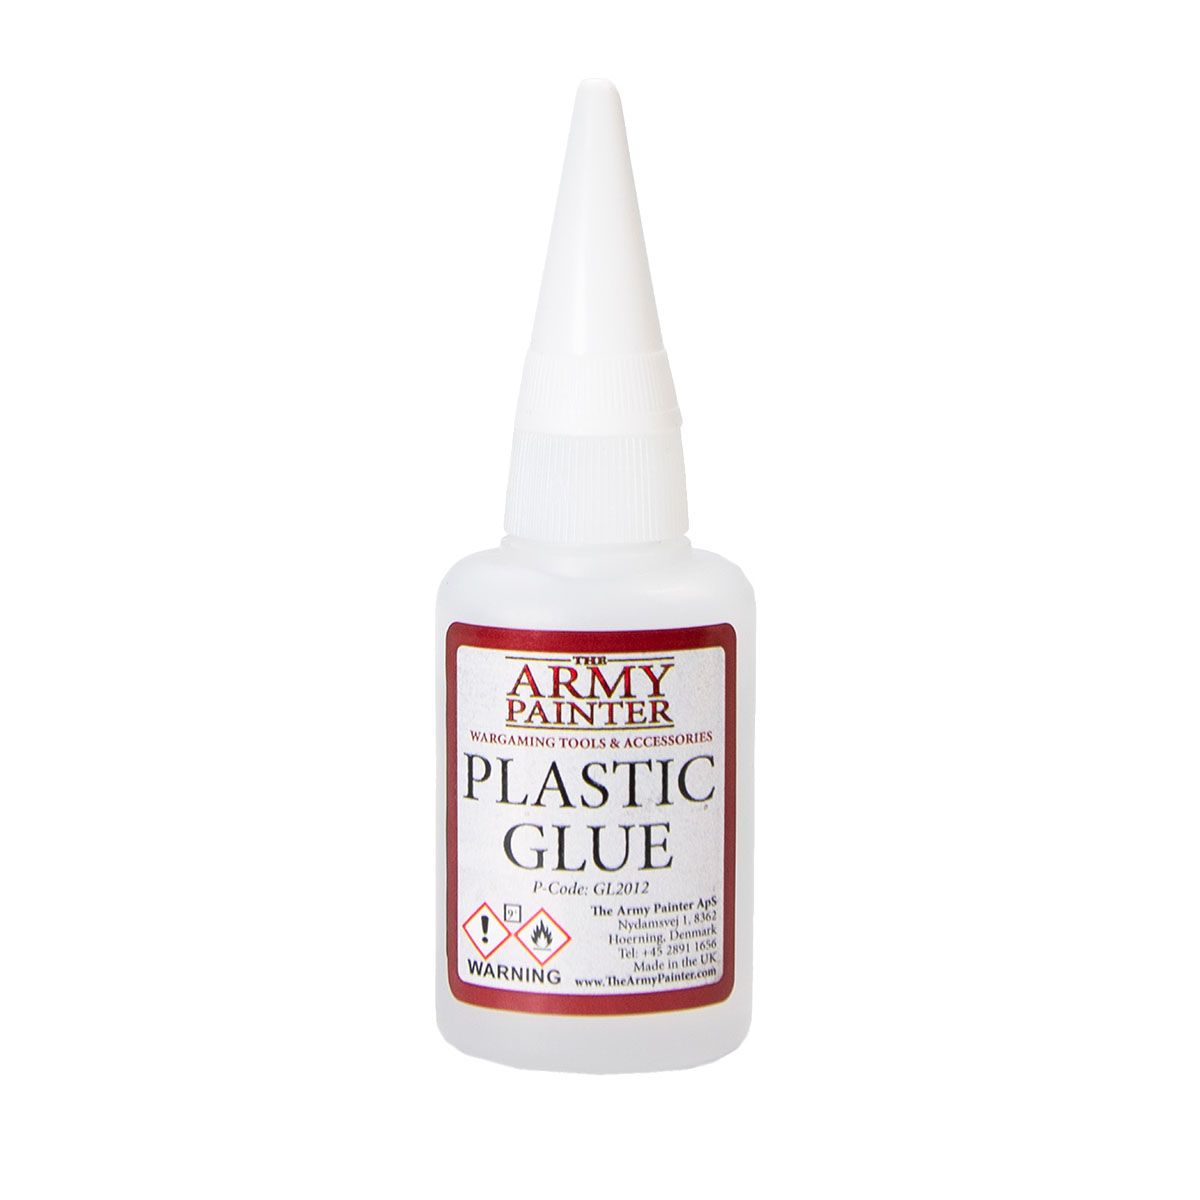 Plastic Glue (The Army Painter)